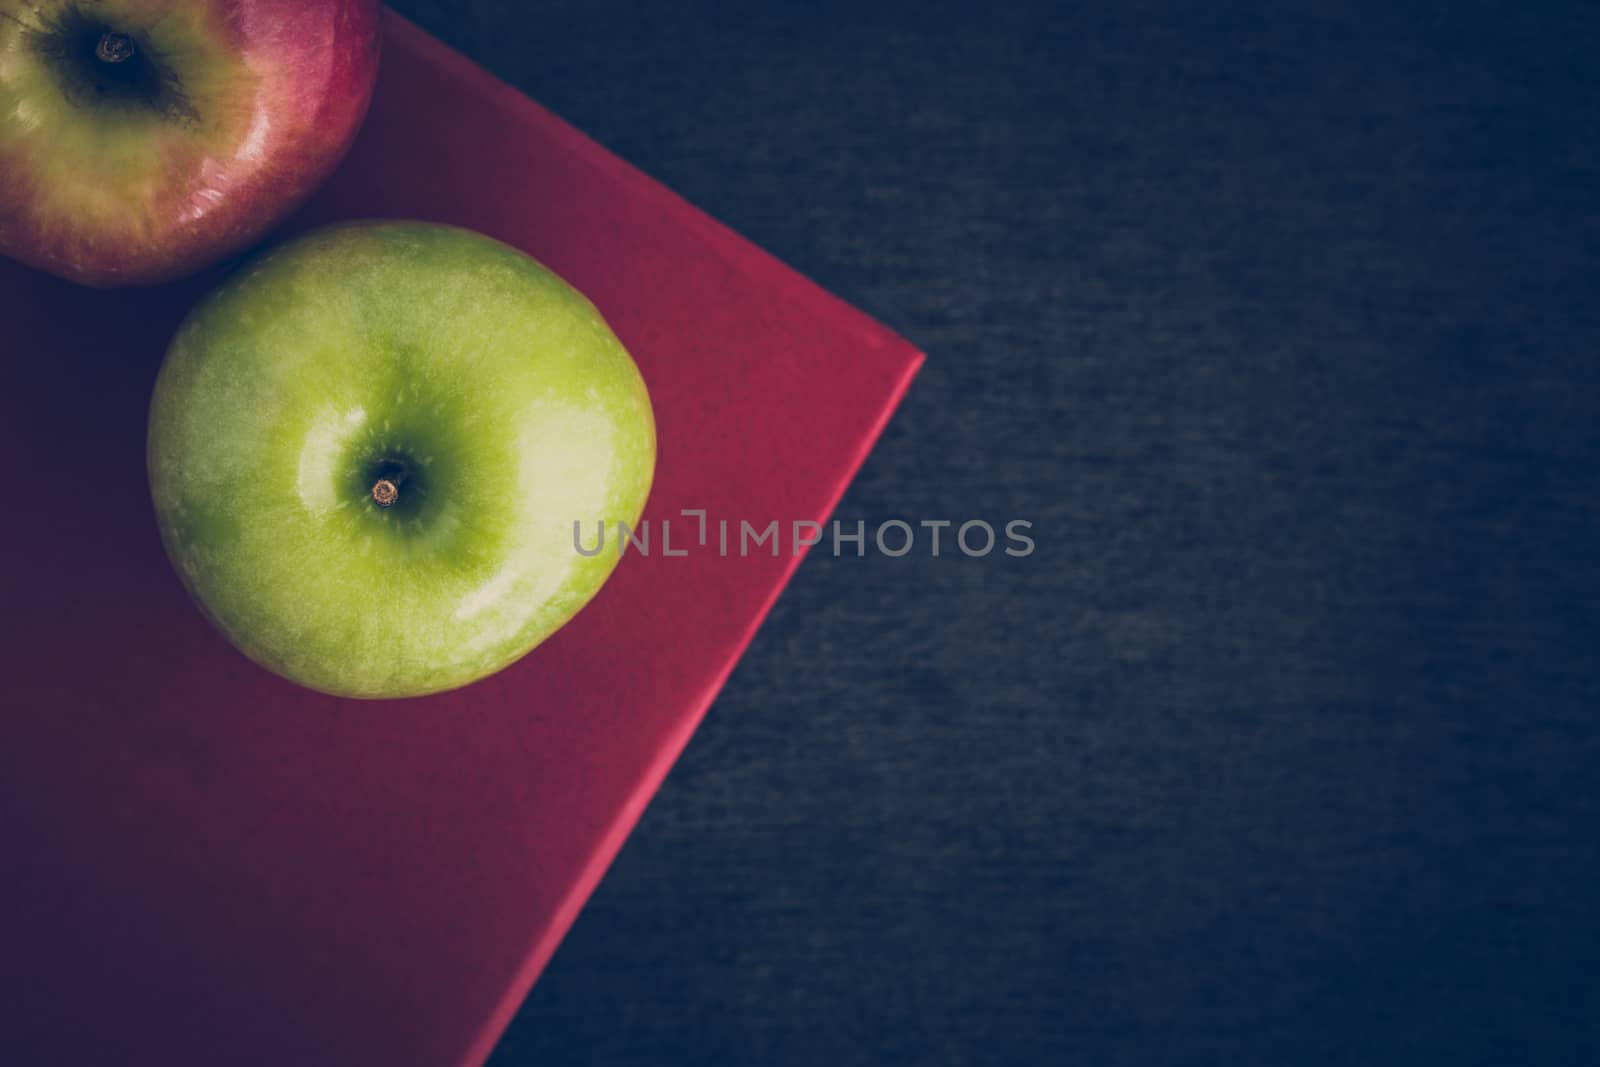 Green apple with book illustrated knowledge and wisdom concept.